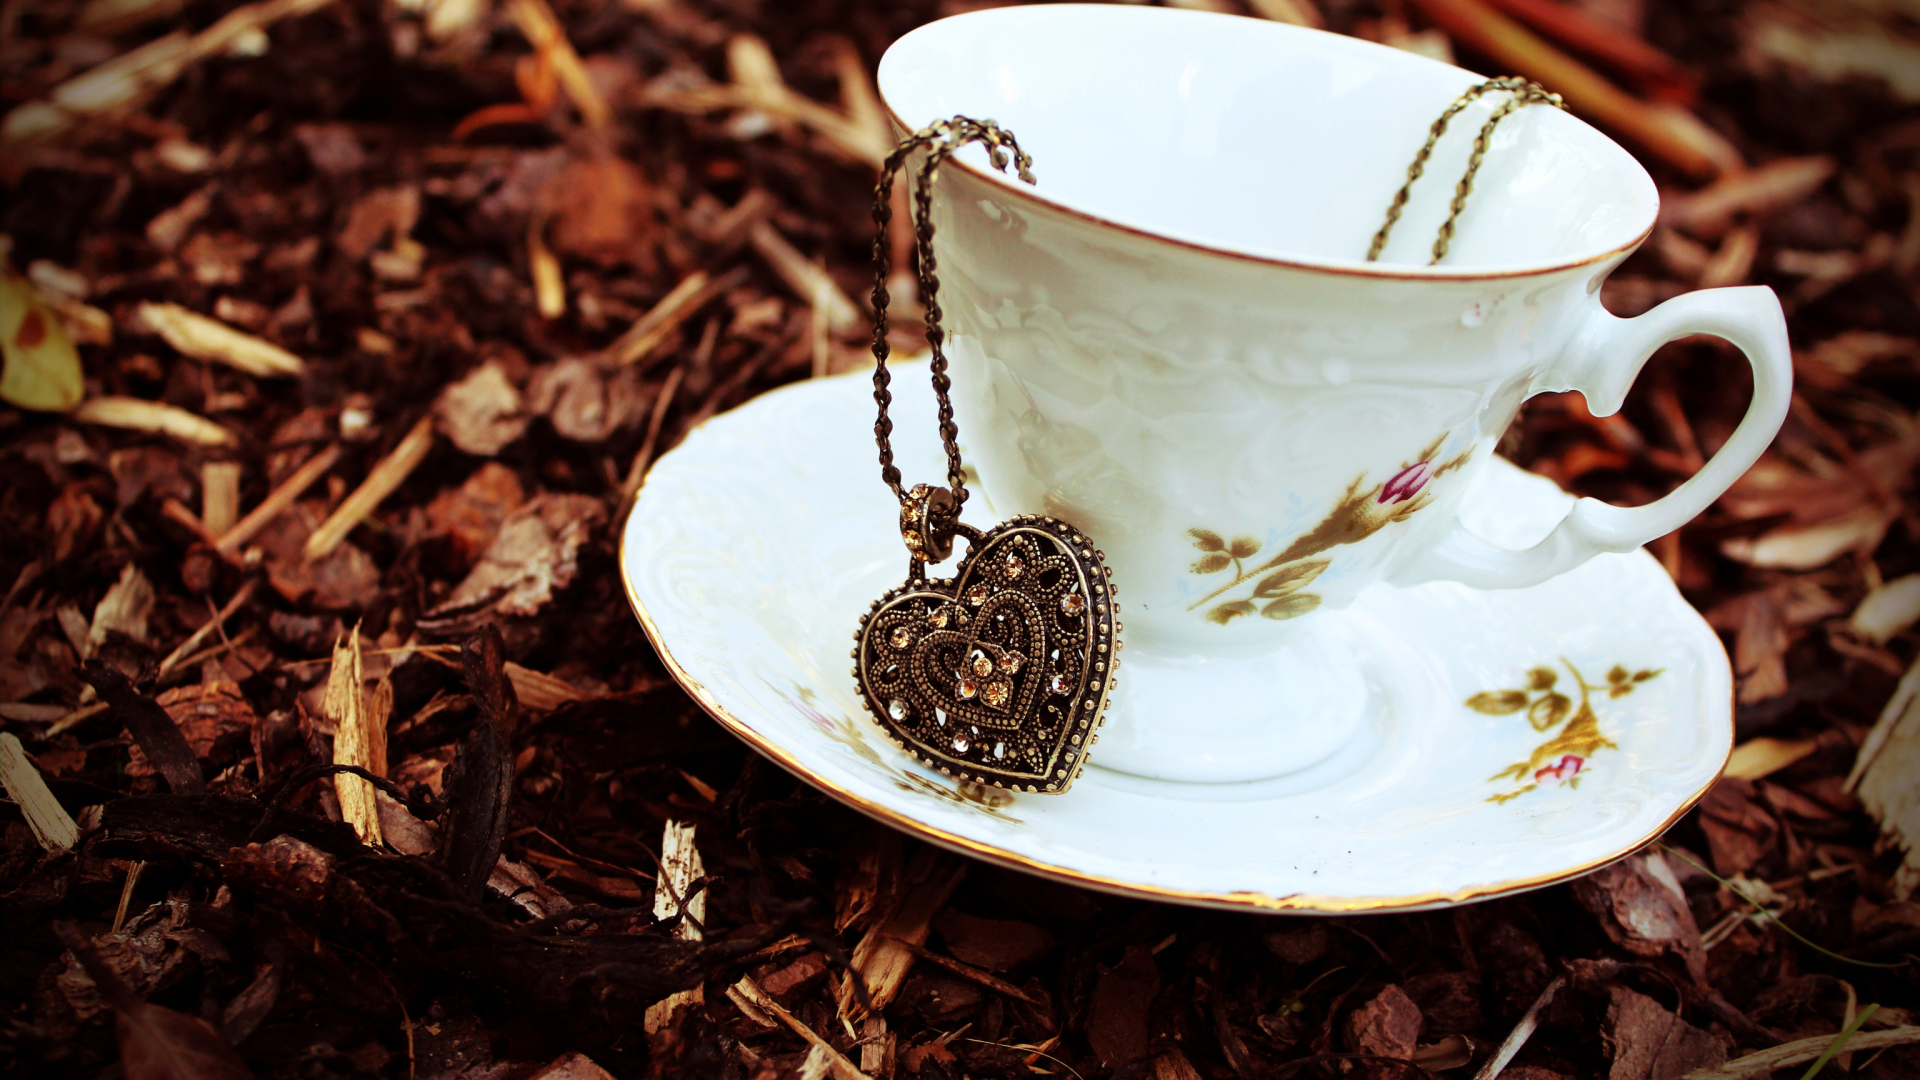 Das Heart Pendant And Vintage Cup Wallpaper 1920x1080